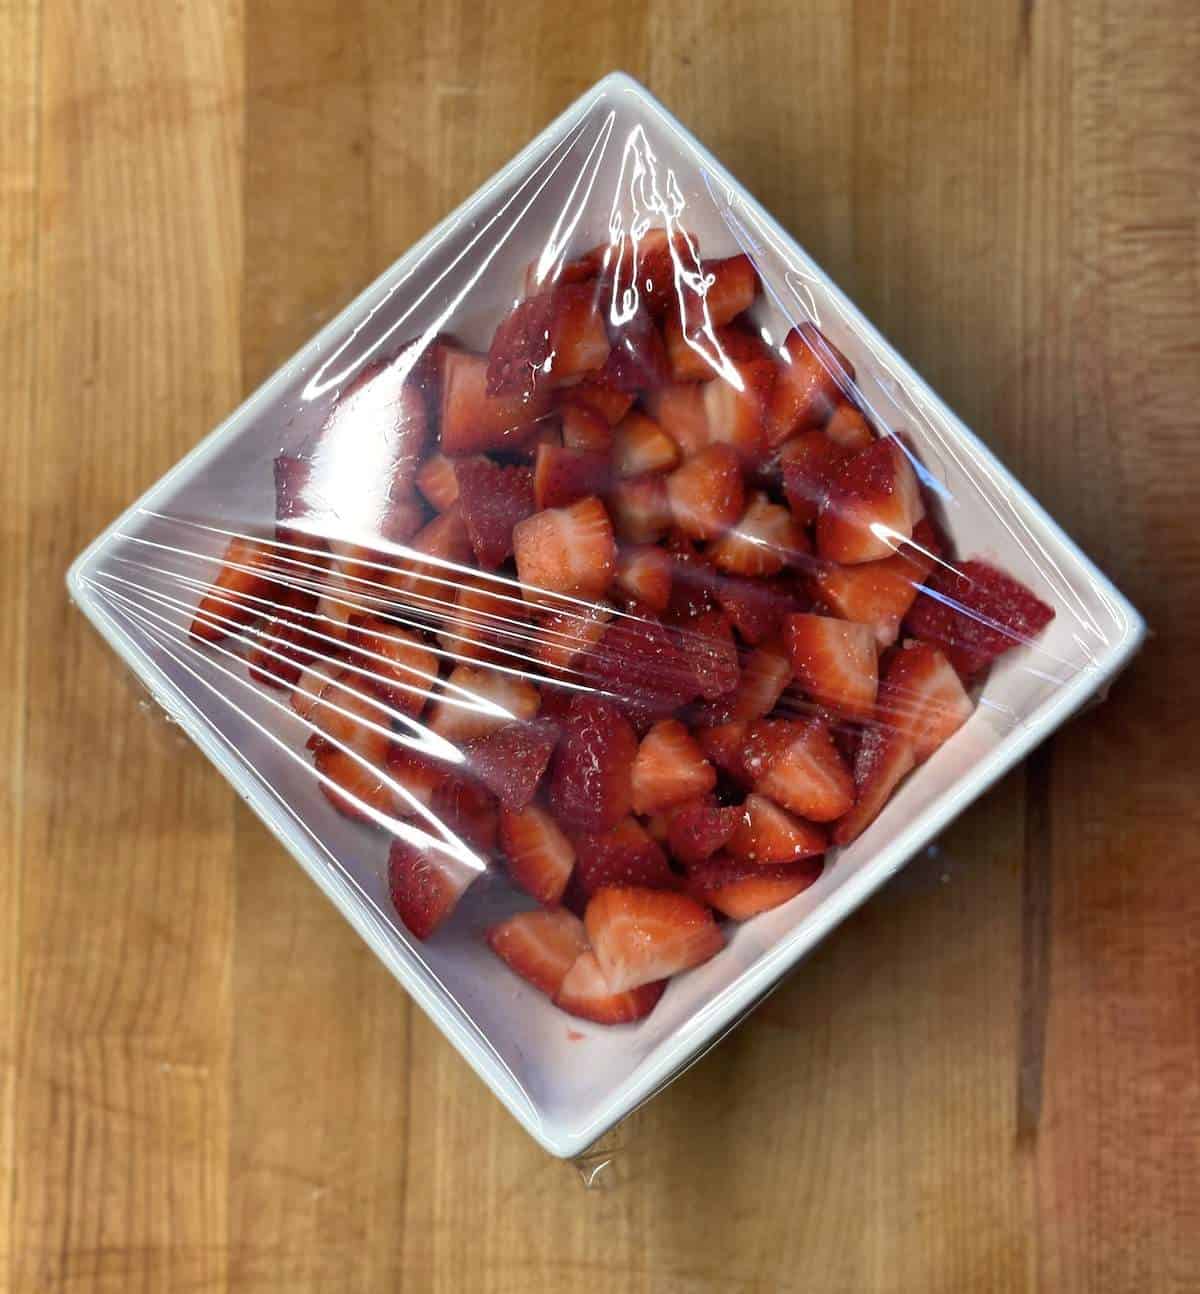 A bowl of sugar coated strawberries wrapped in plastic.